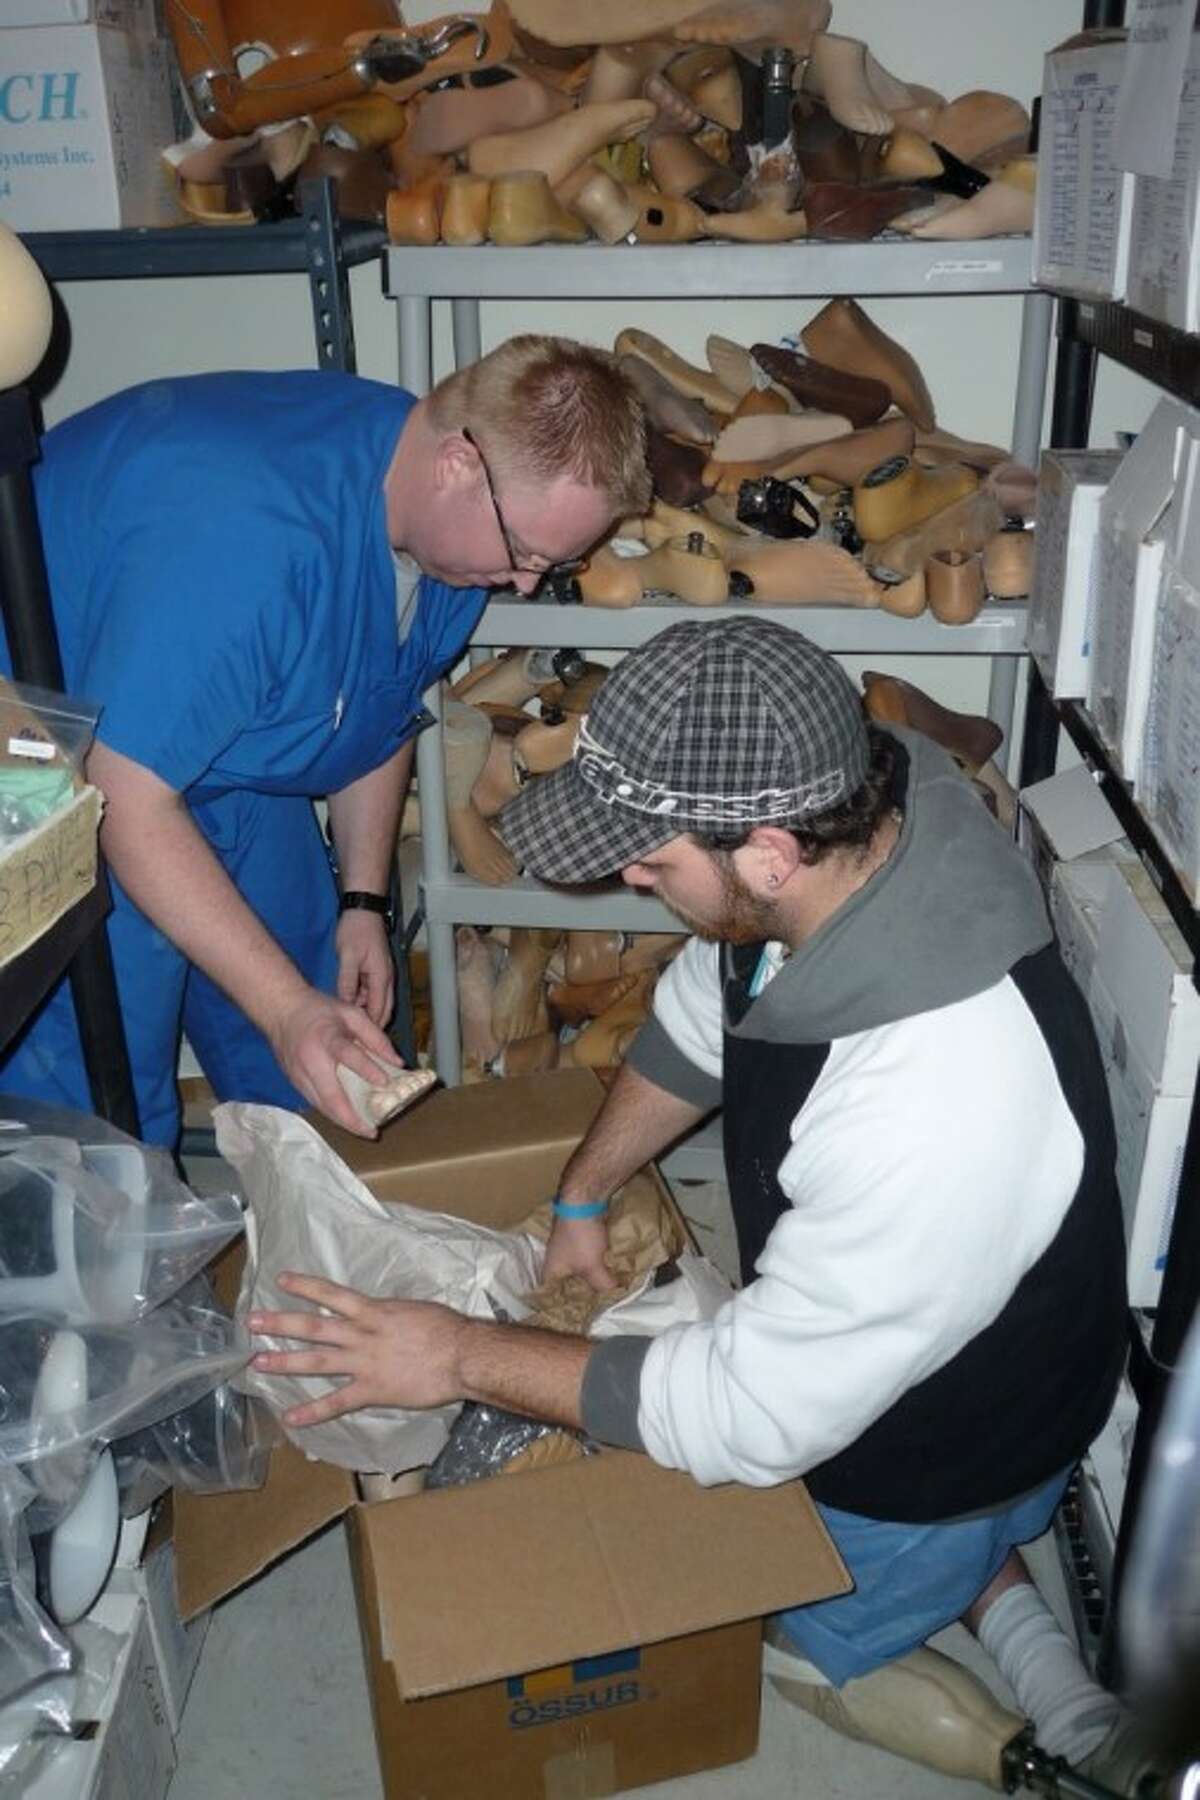 Amputee & Prosthetic Center employees Nick Glebowski and Aaron Johnson pack prosthetic components to send to people that lost limbs in Haiti’s earthquake.